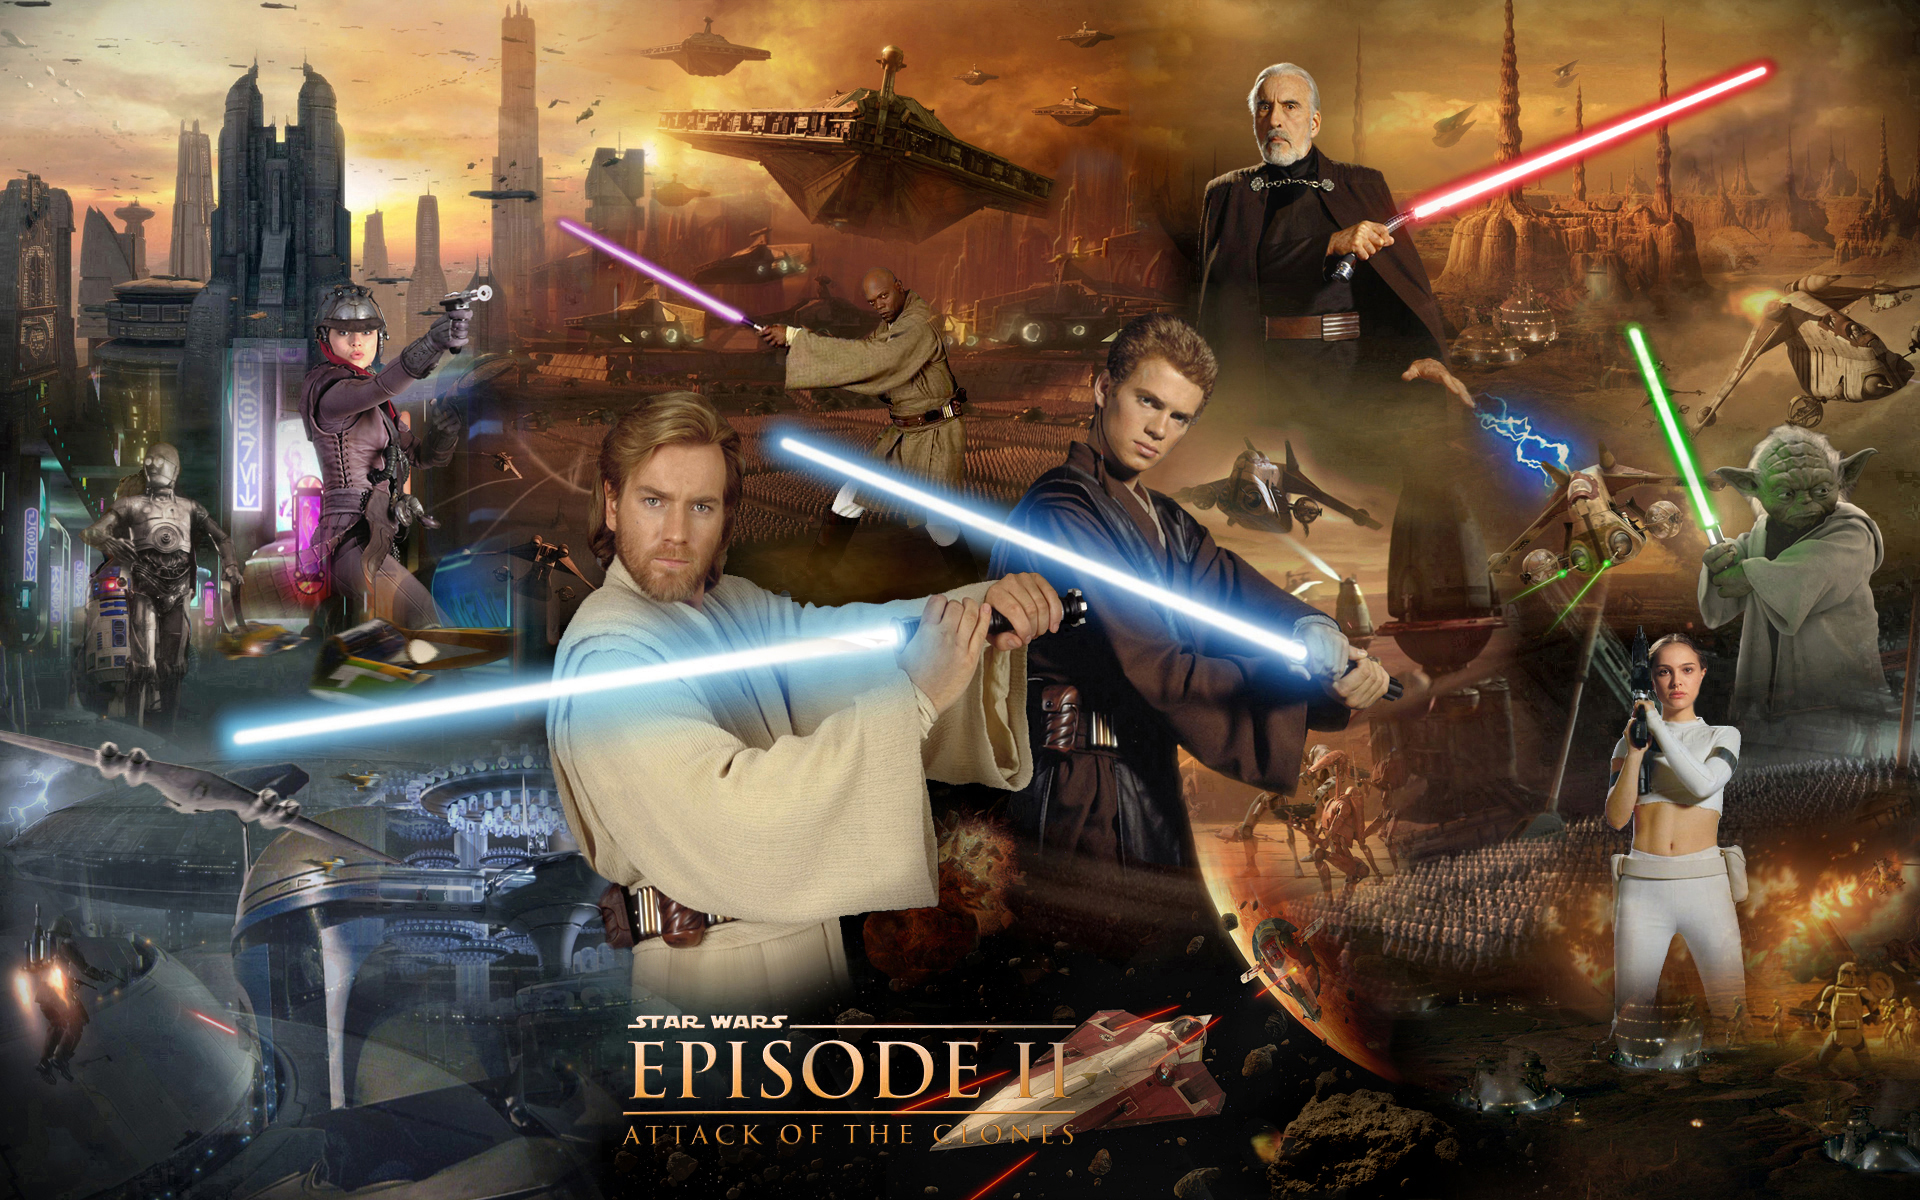 Star Wars Attack of the Clones image star wars attack of the clones